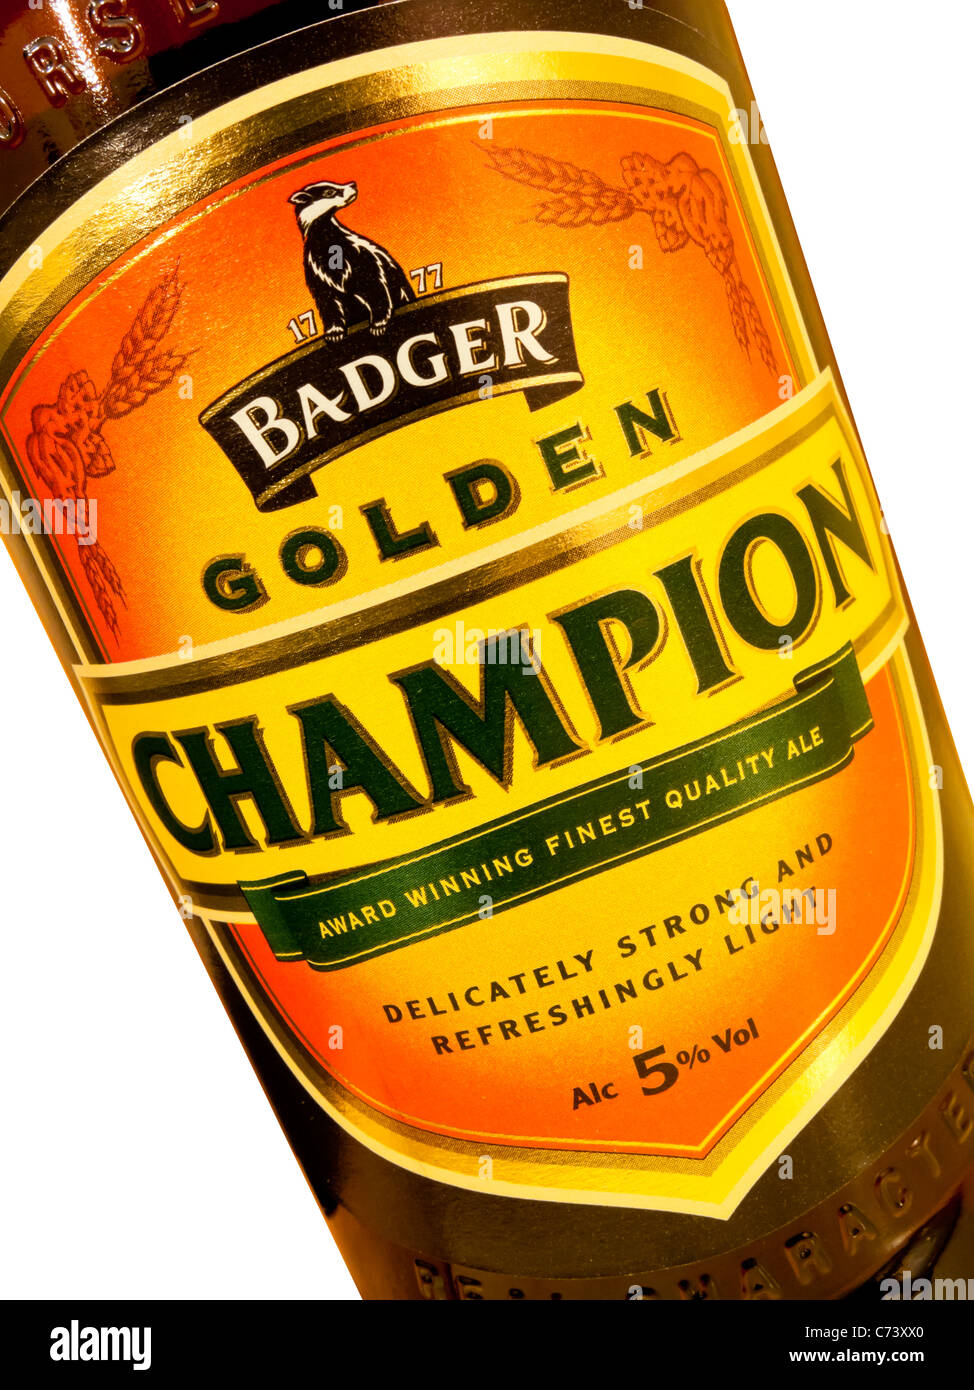 Label on a bottle of Badger Golden Champion a premium ale brewed by Hall  and Woodhouse of Blandford Forum Dorset England UK Stock Photo - Alamy